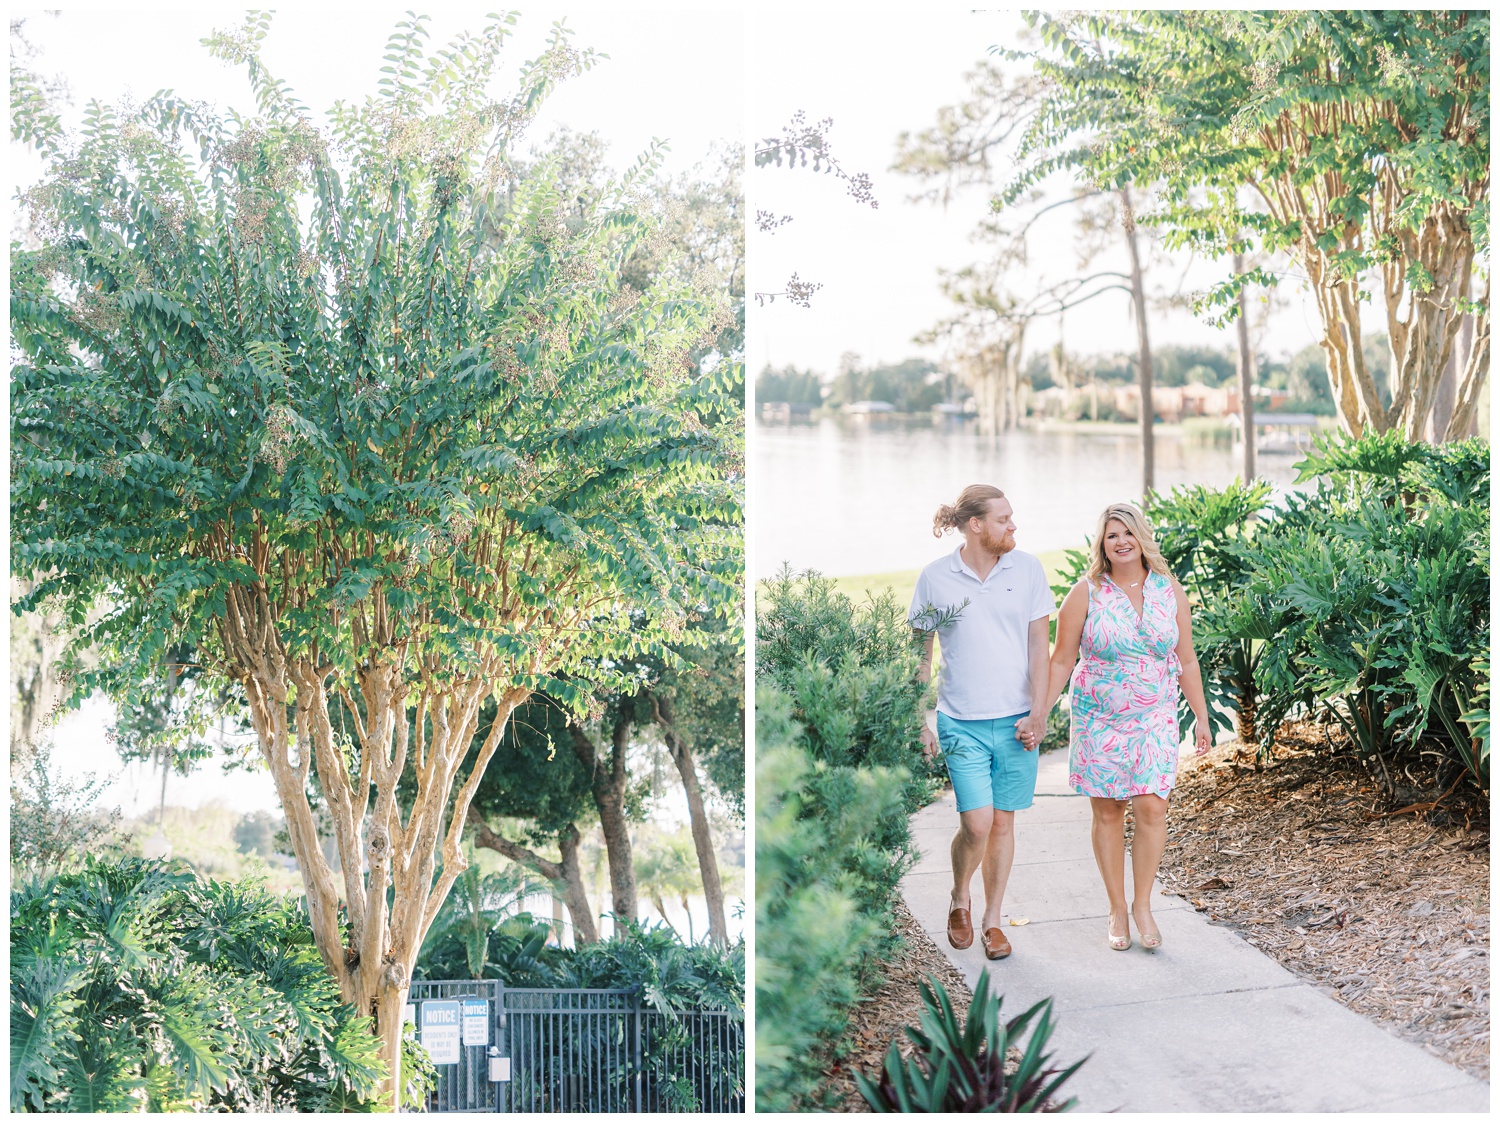 Orlando engagement session with colorful Lilly Pulitzer dress